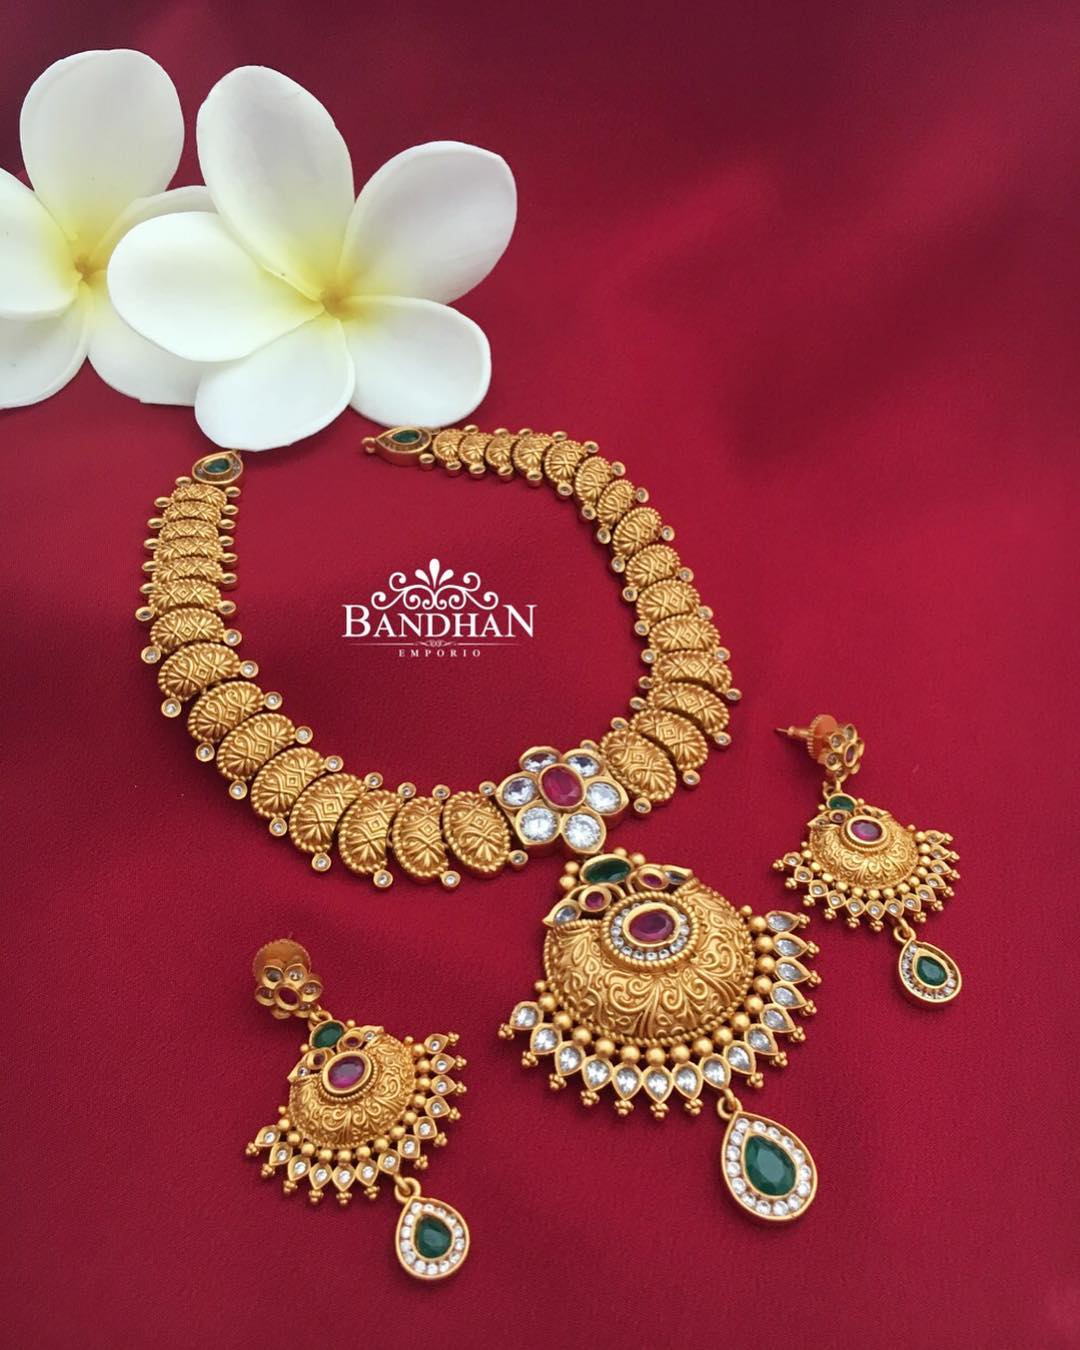 Luxury Necklace From Bandhan